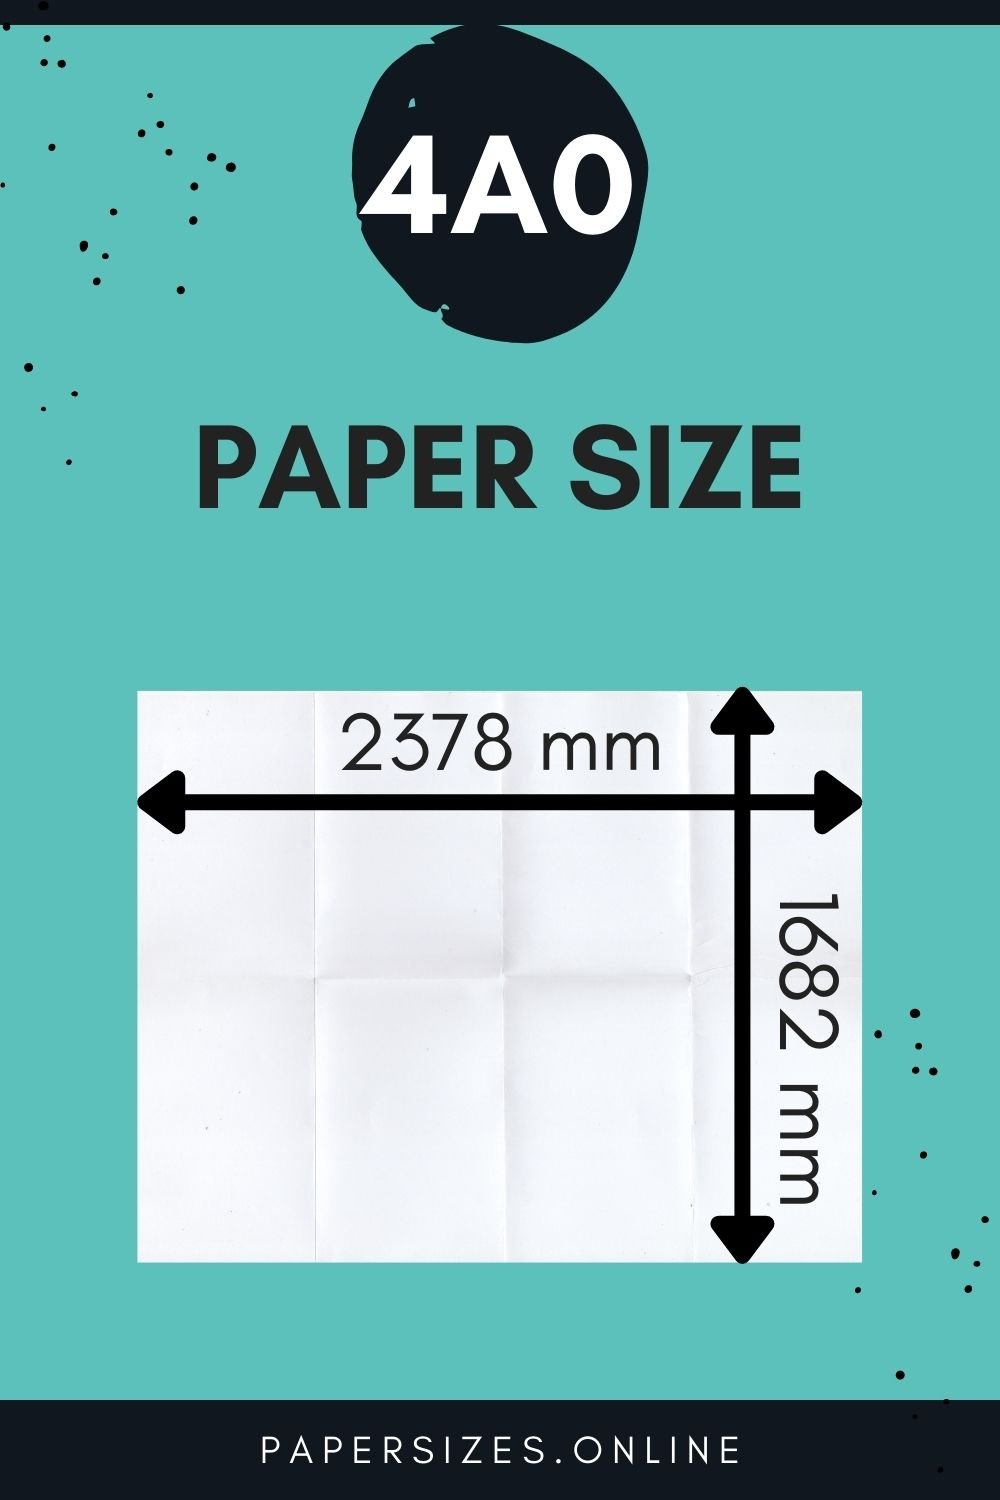 4a0-paper-size-and-dimensions-paper-sizes-online